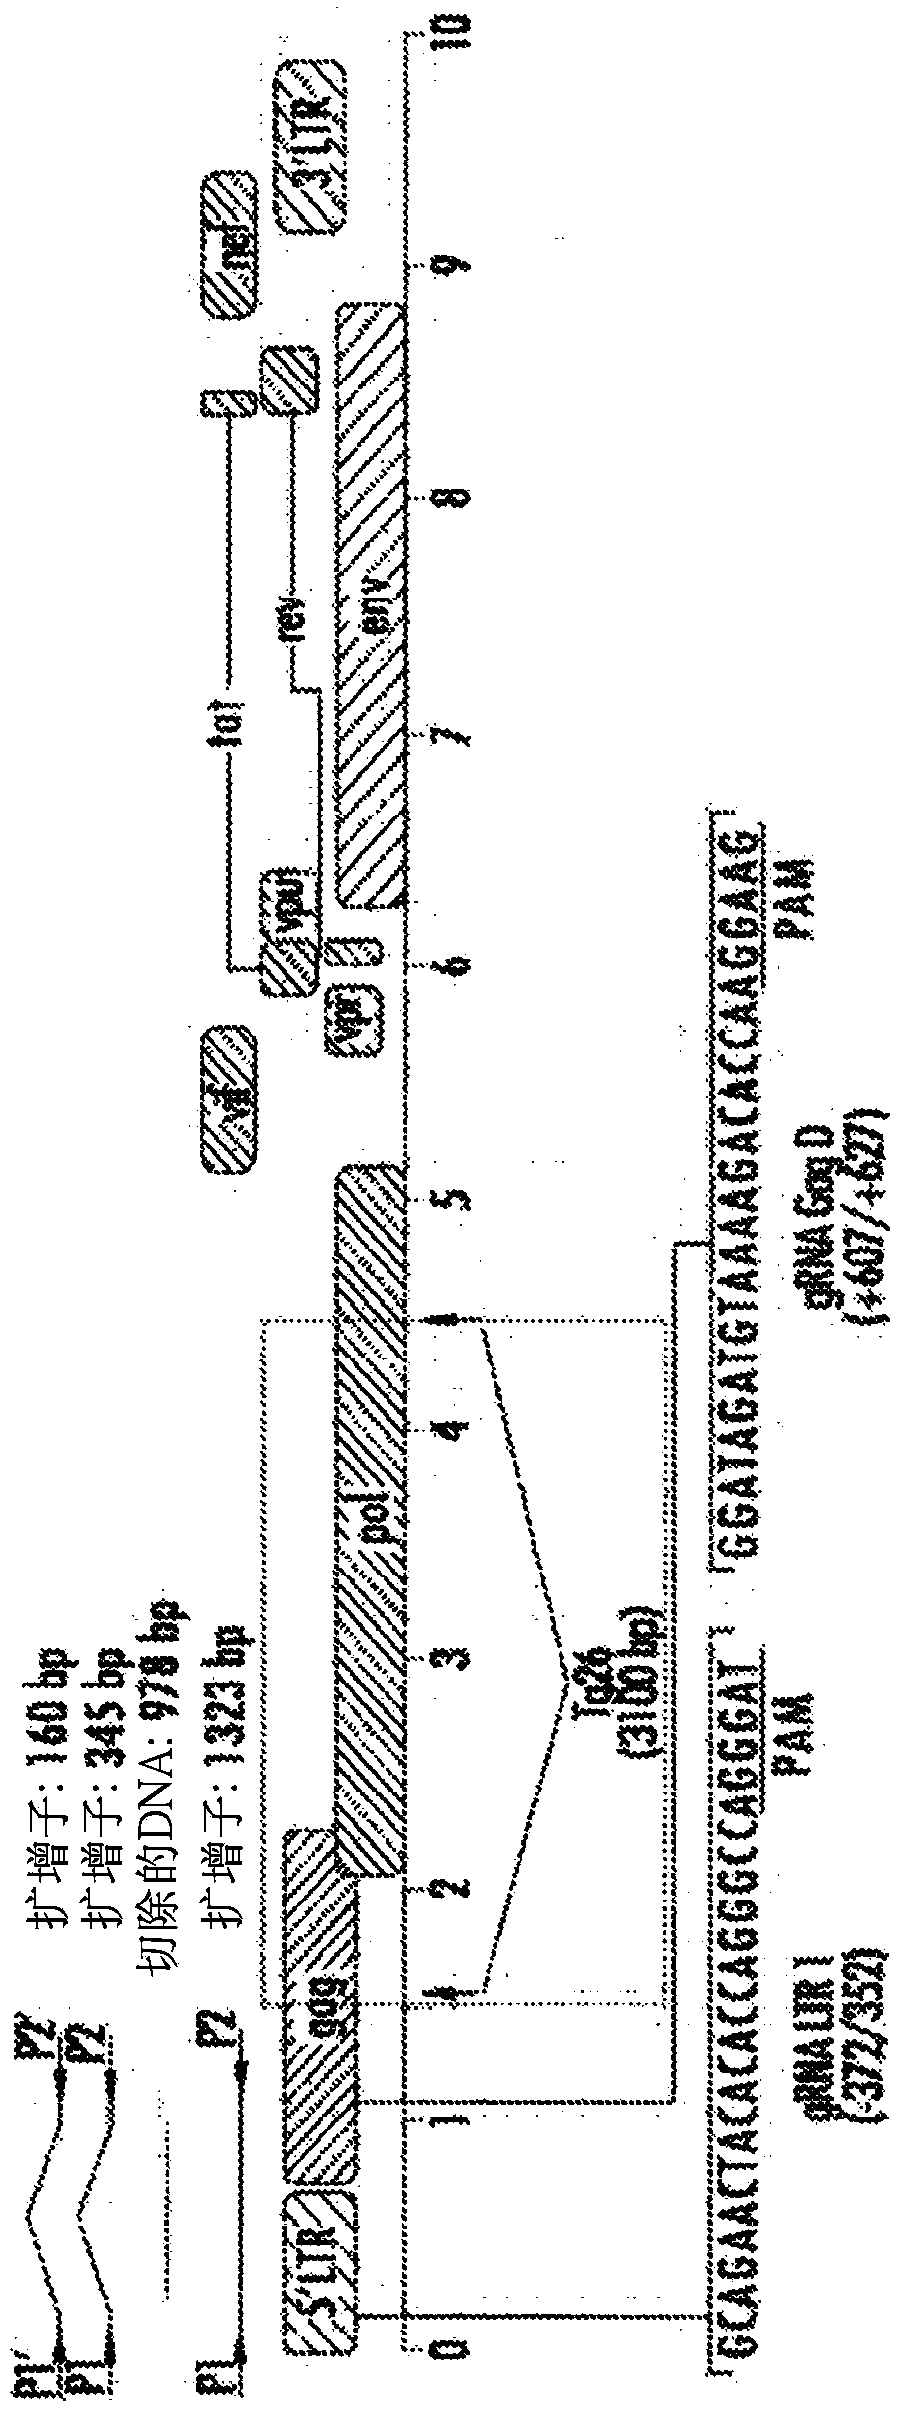 Excision of retroviral nucleic acid sequences